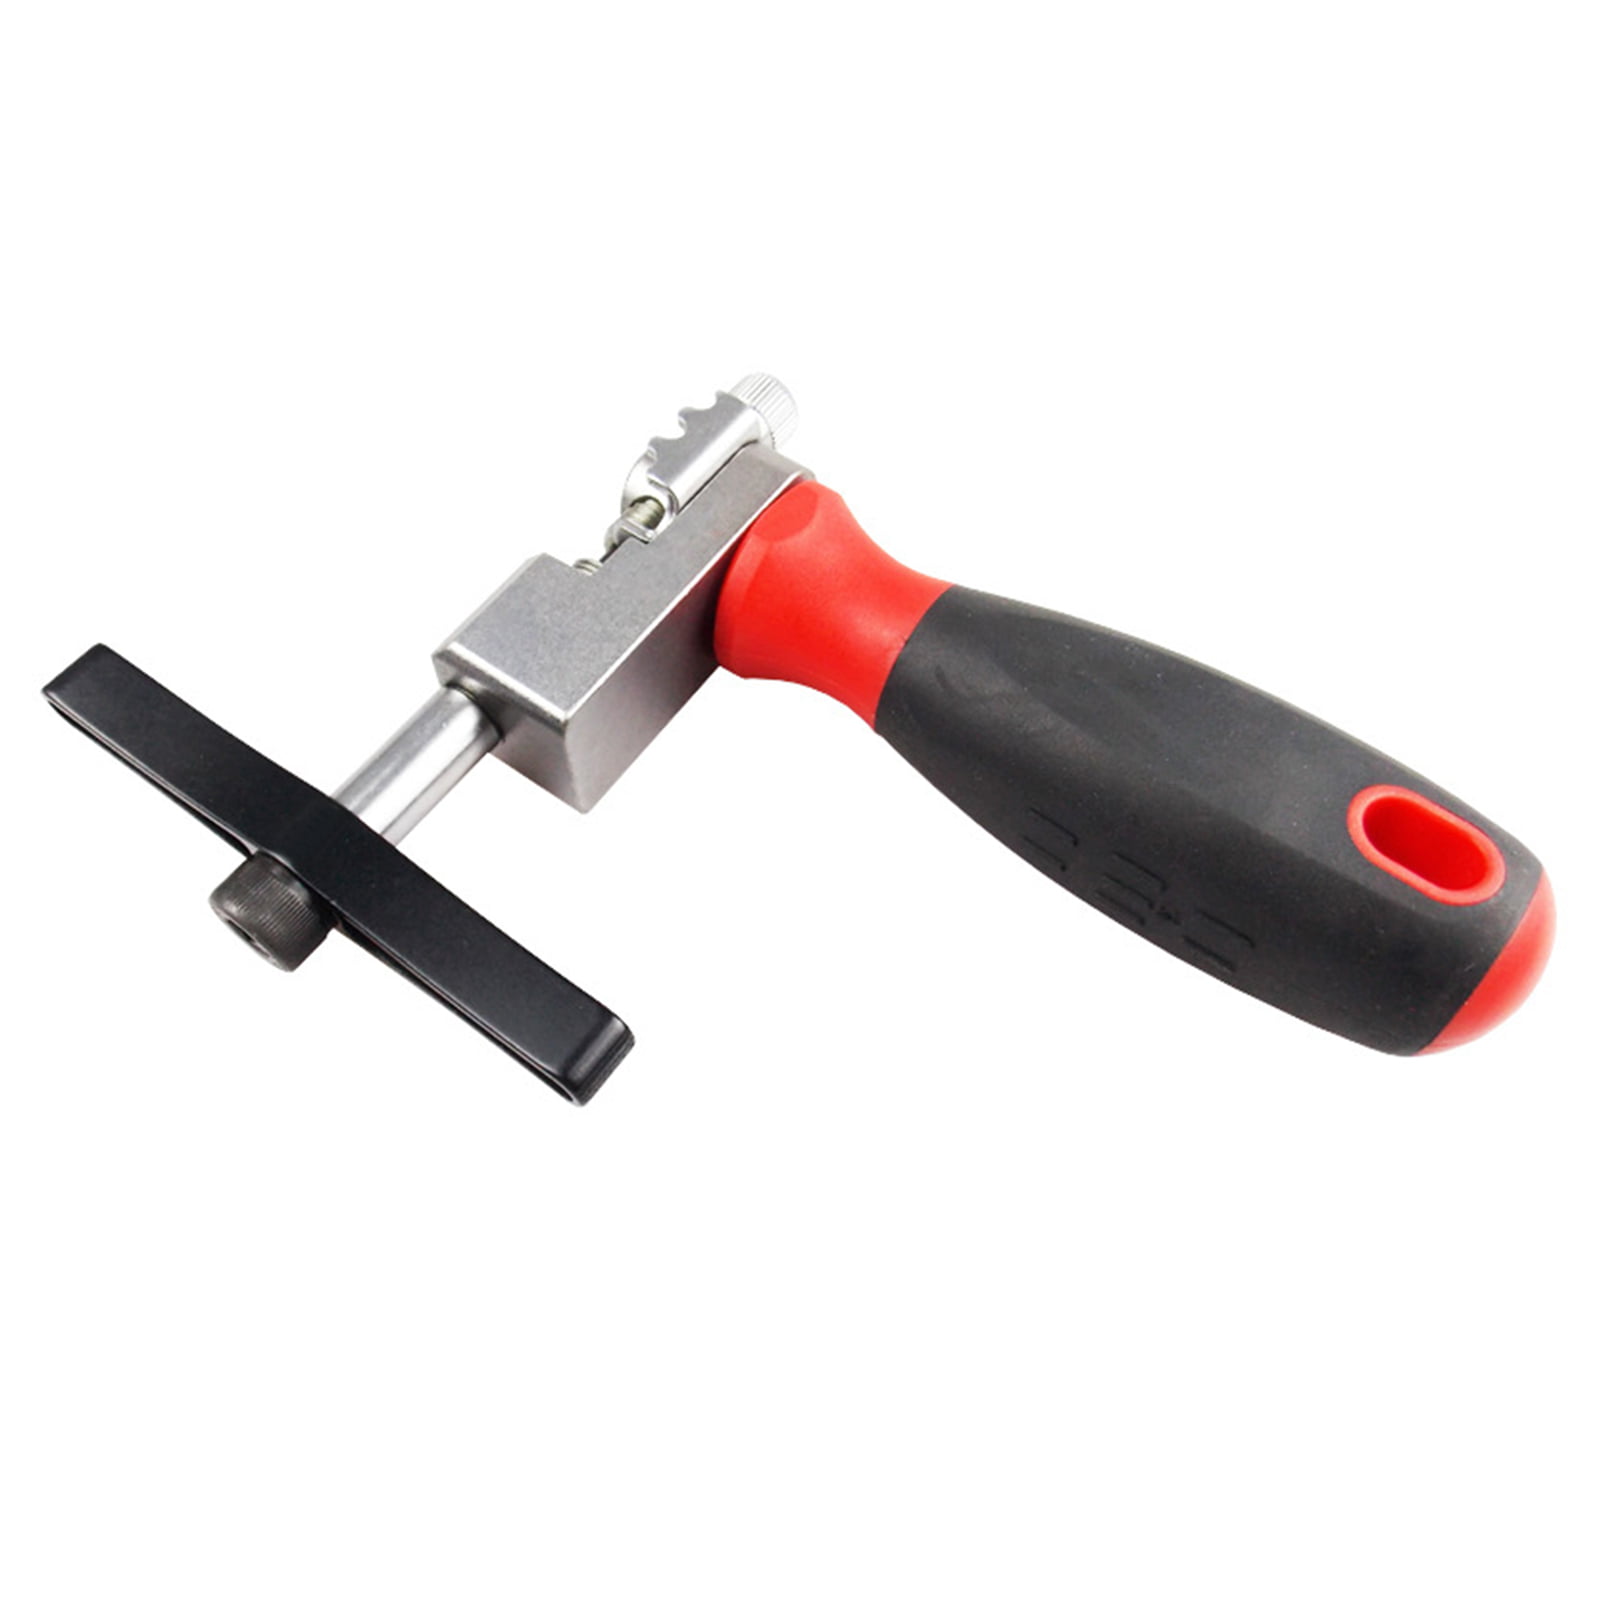 Bicycle Bike Chain Pin Remover and Quick Link Tool F0B7 Extract Splitter N9F8 